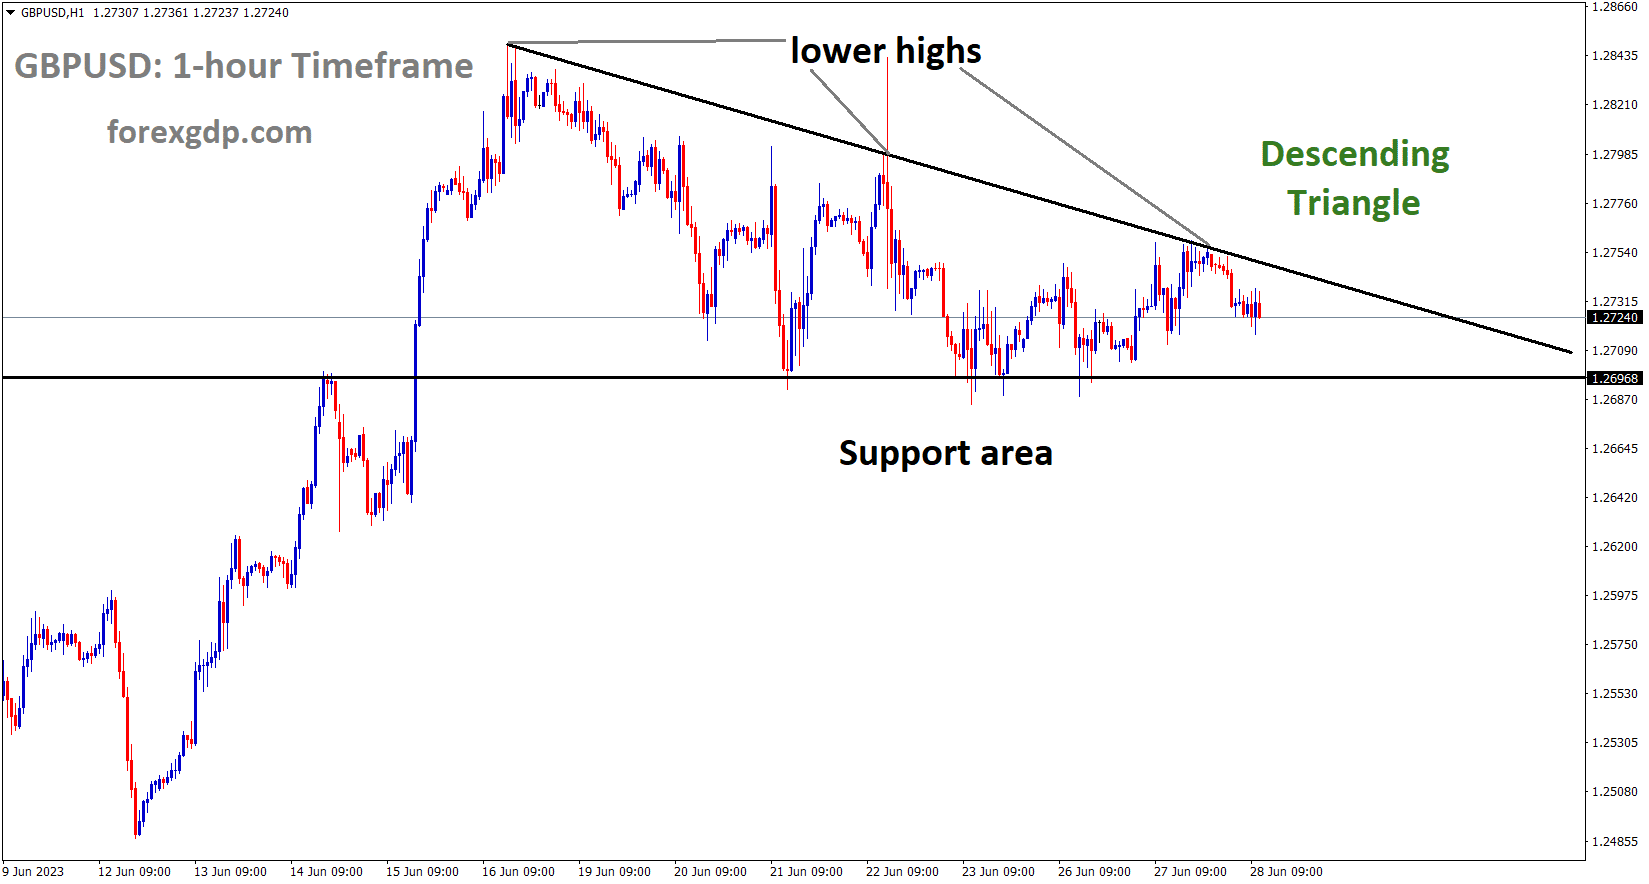 GBPUSD is moving in the Descending triangle pattern and the market has fallen from the lower high area of the pattern